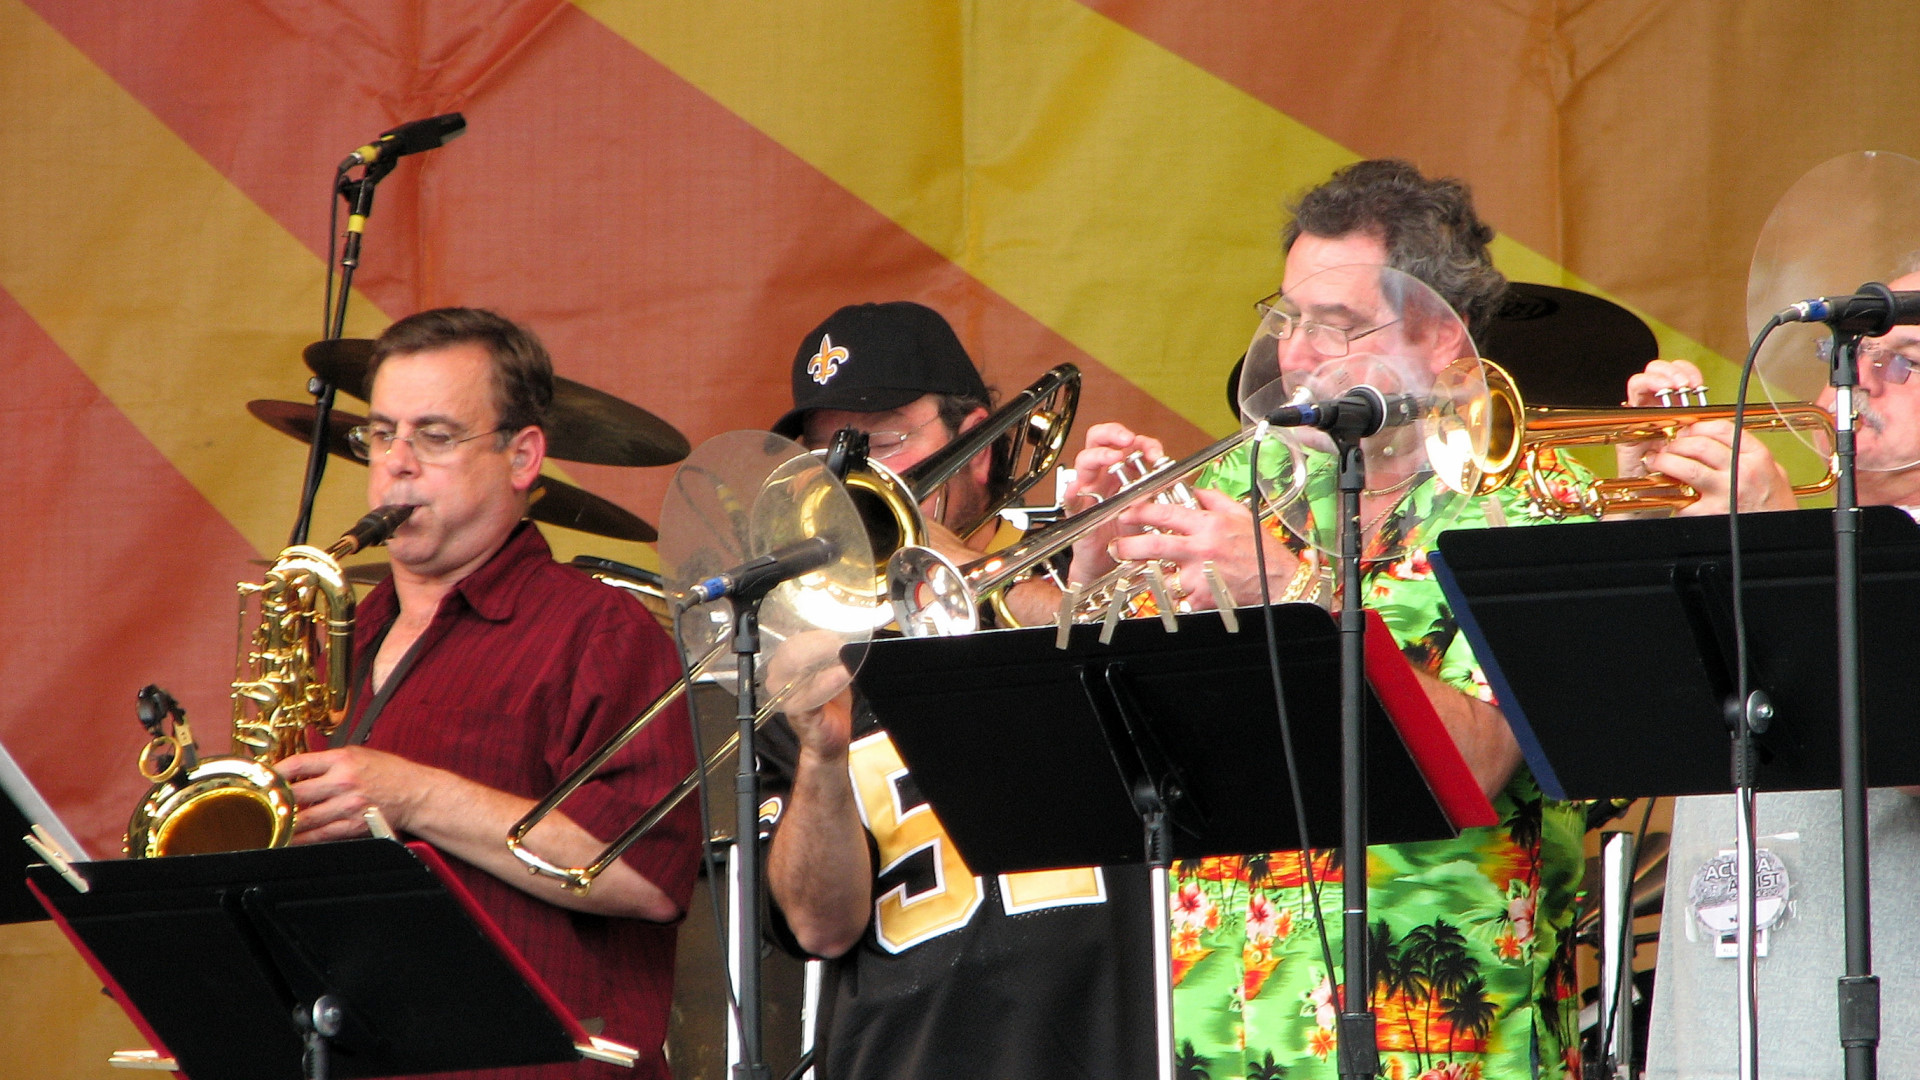 Ward Smith on sax, Mike Genevay on trombone, and trumpeters Jimmy Weber and A. J. Pittman